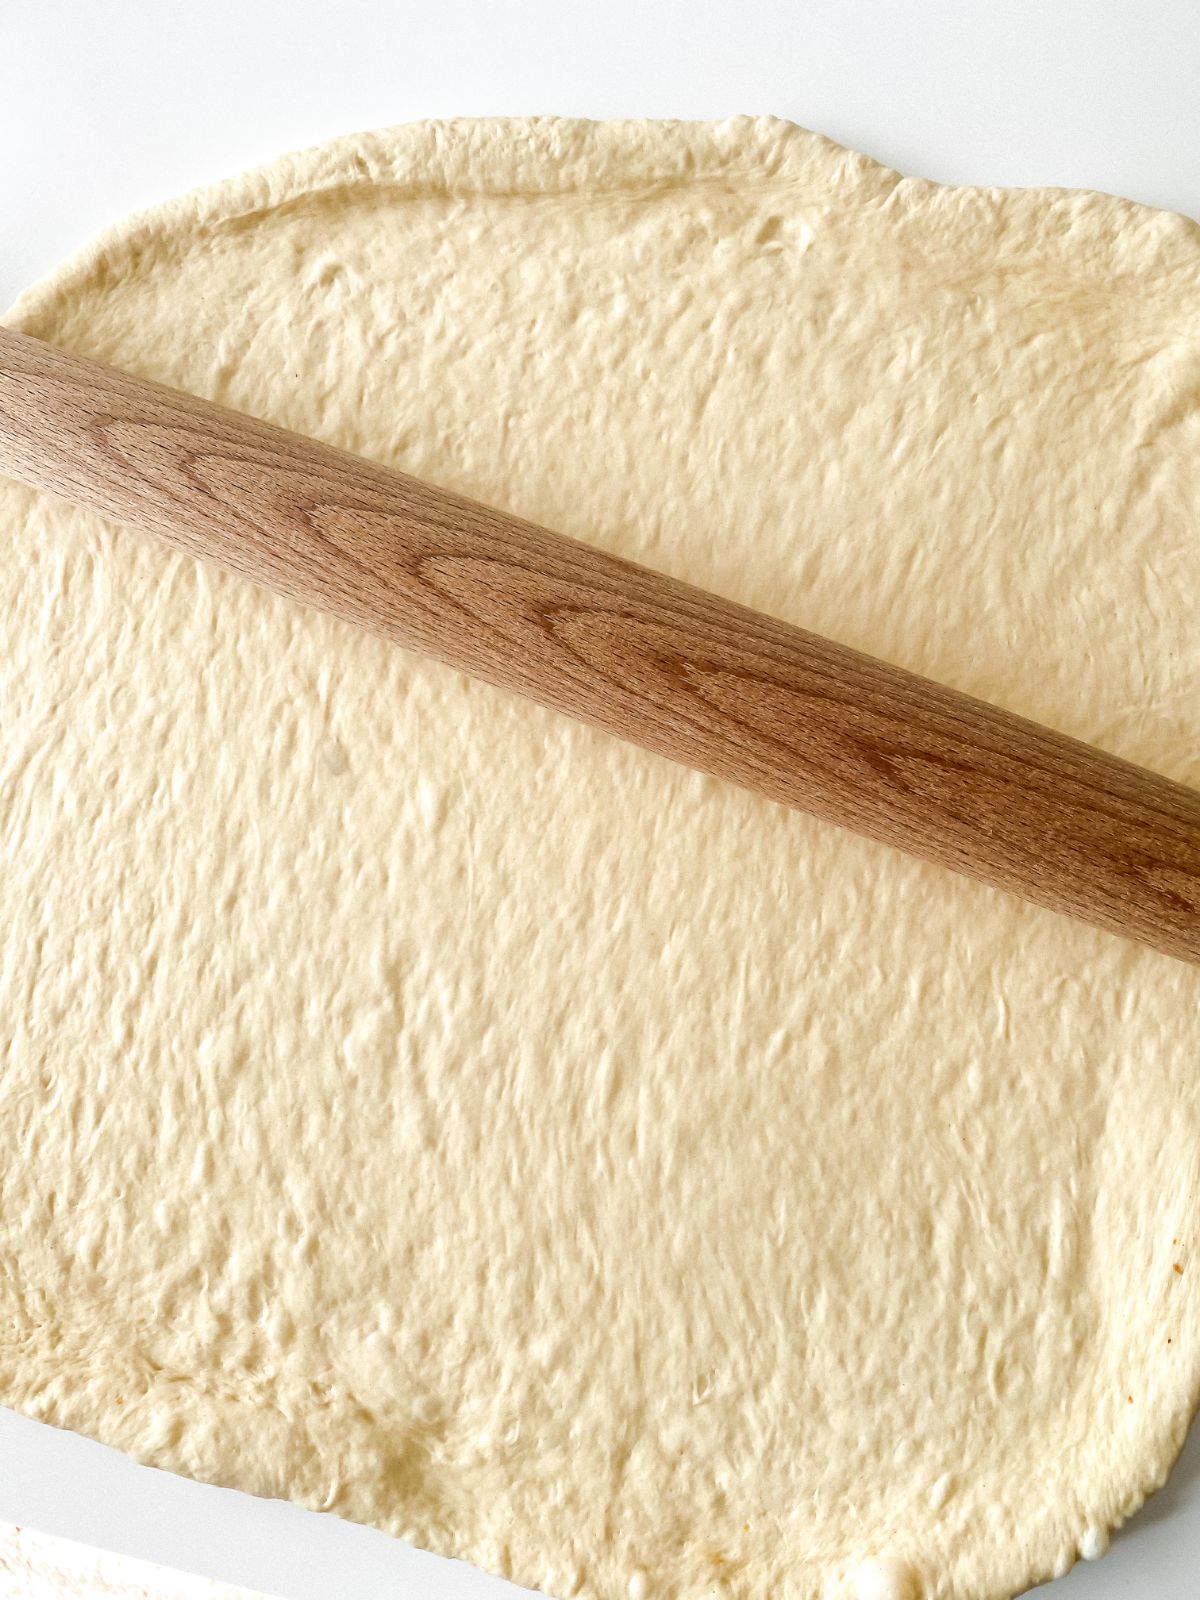 rolling pizza dough with wooden pin